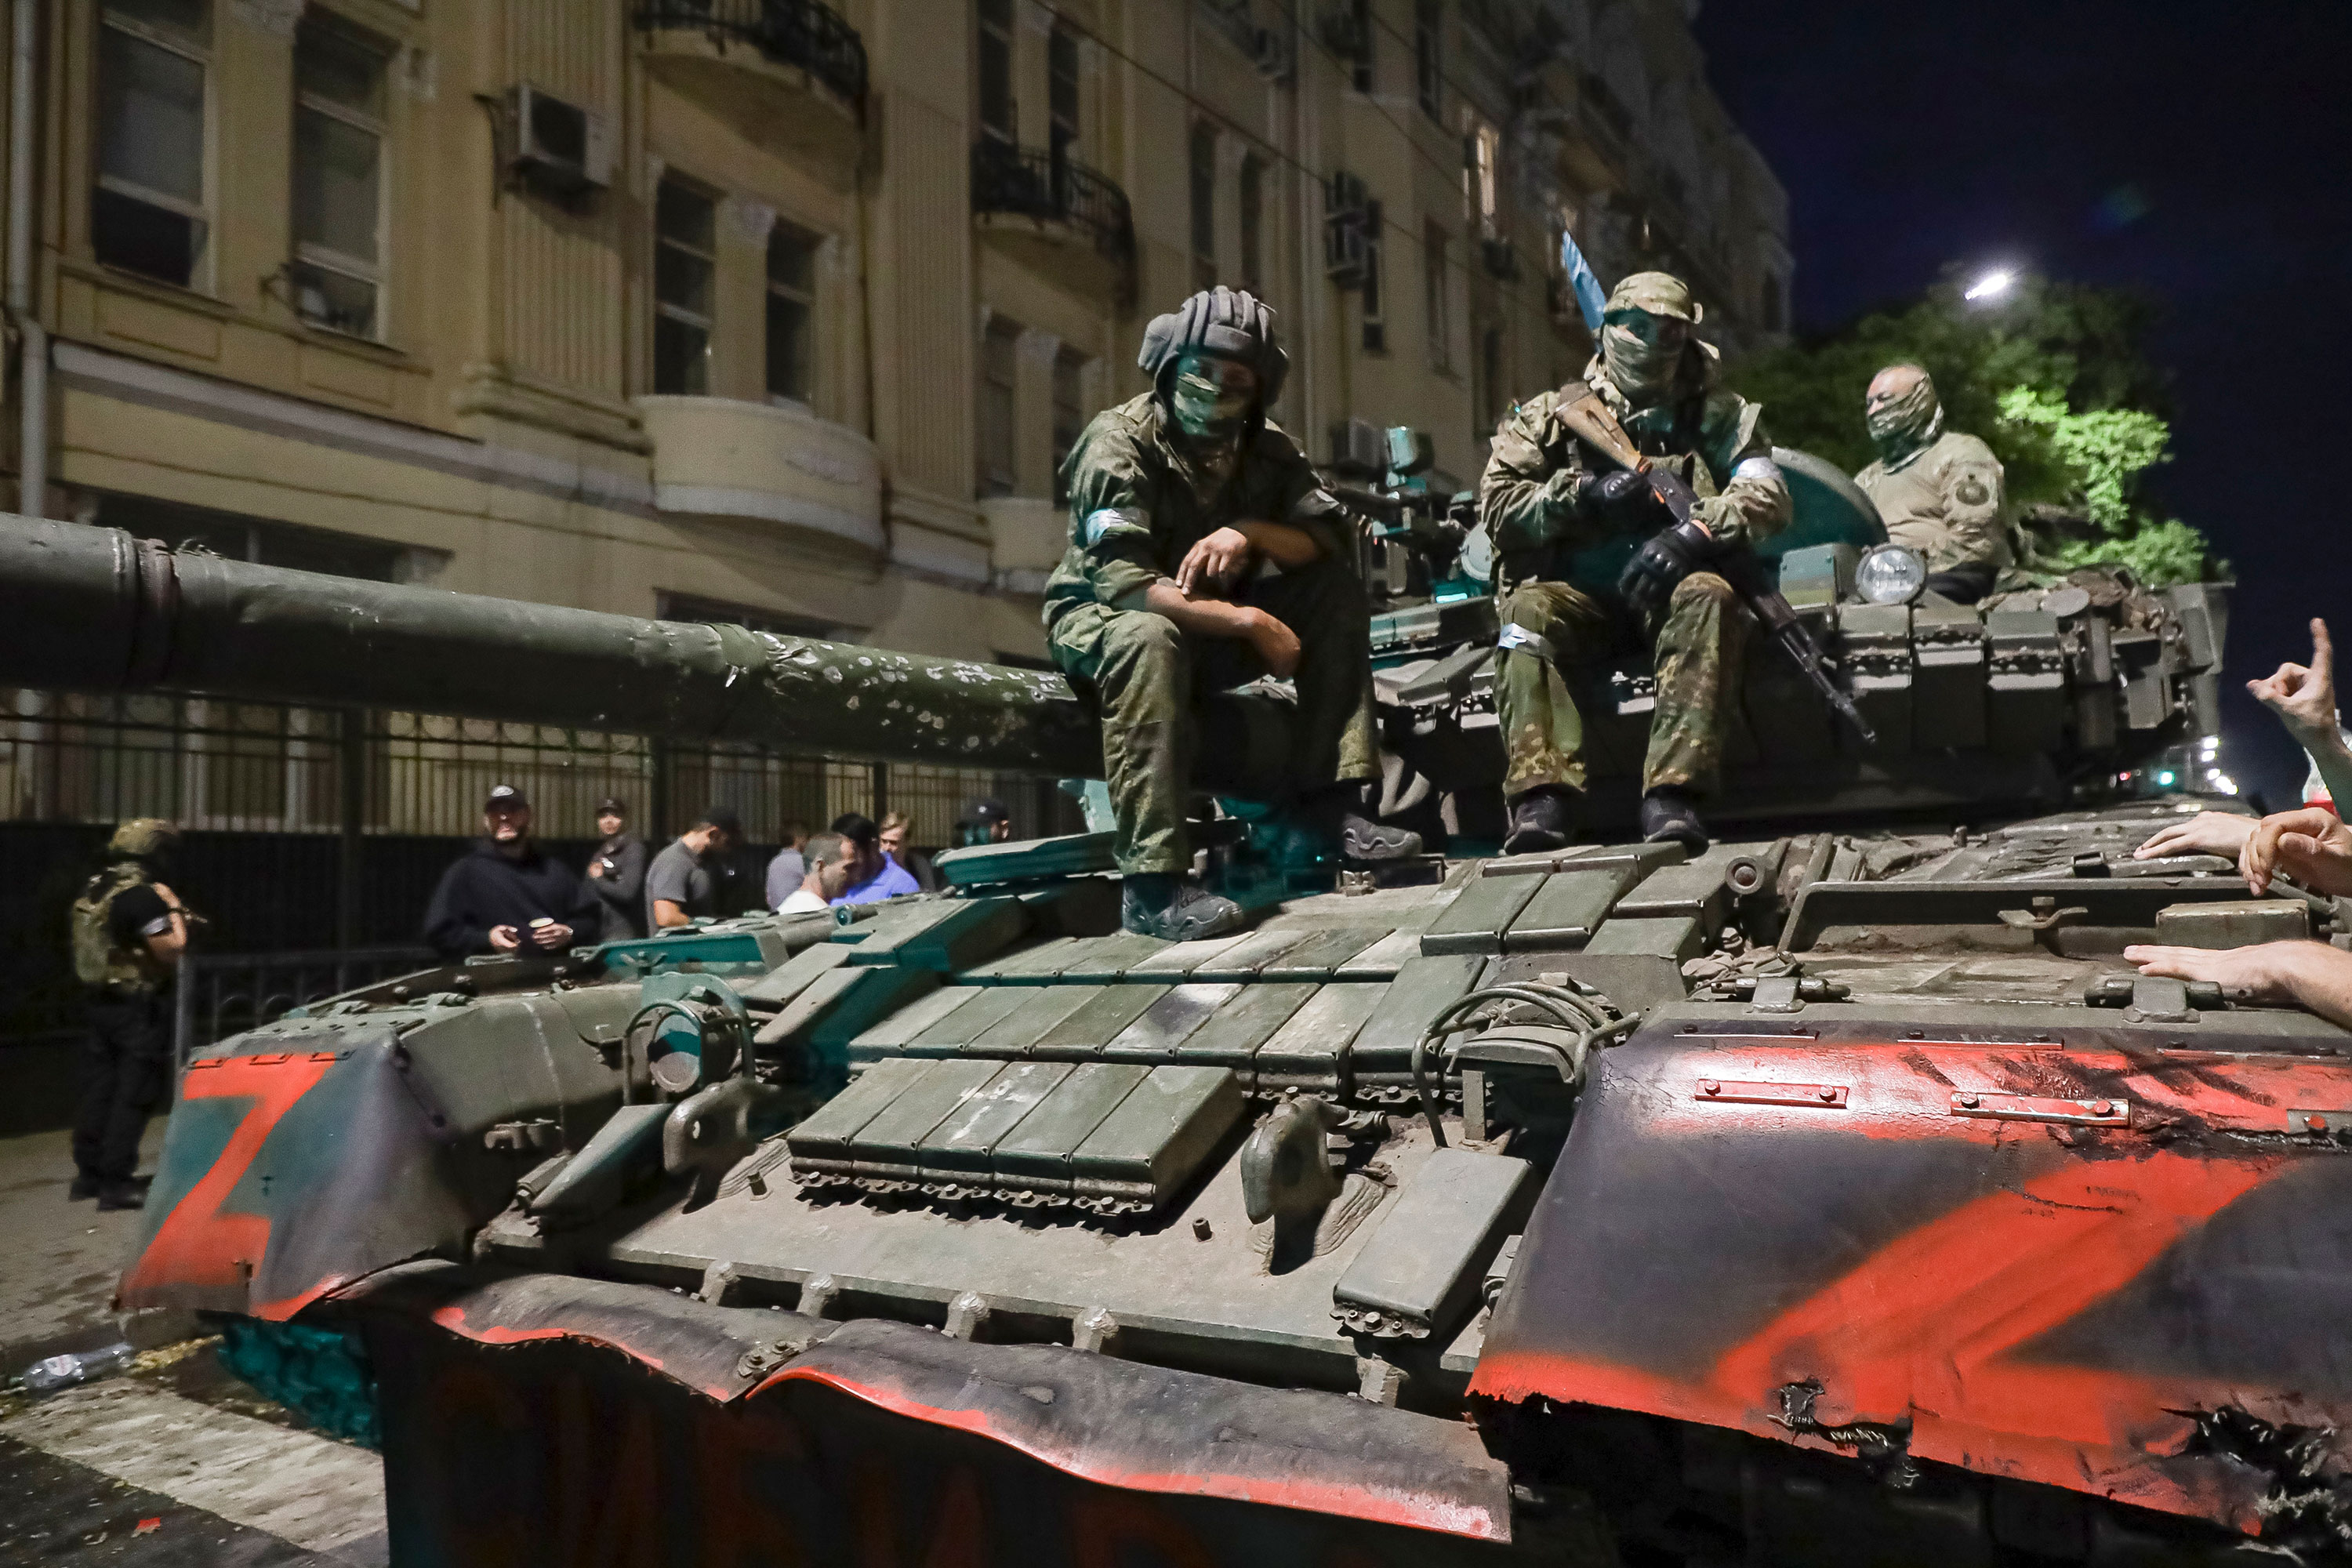 Members of the Wagner Group sit atop a tank in Rostov-on-Don, Russia, on Saturday, June 24.